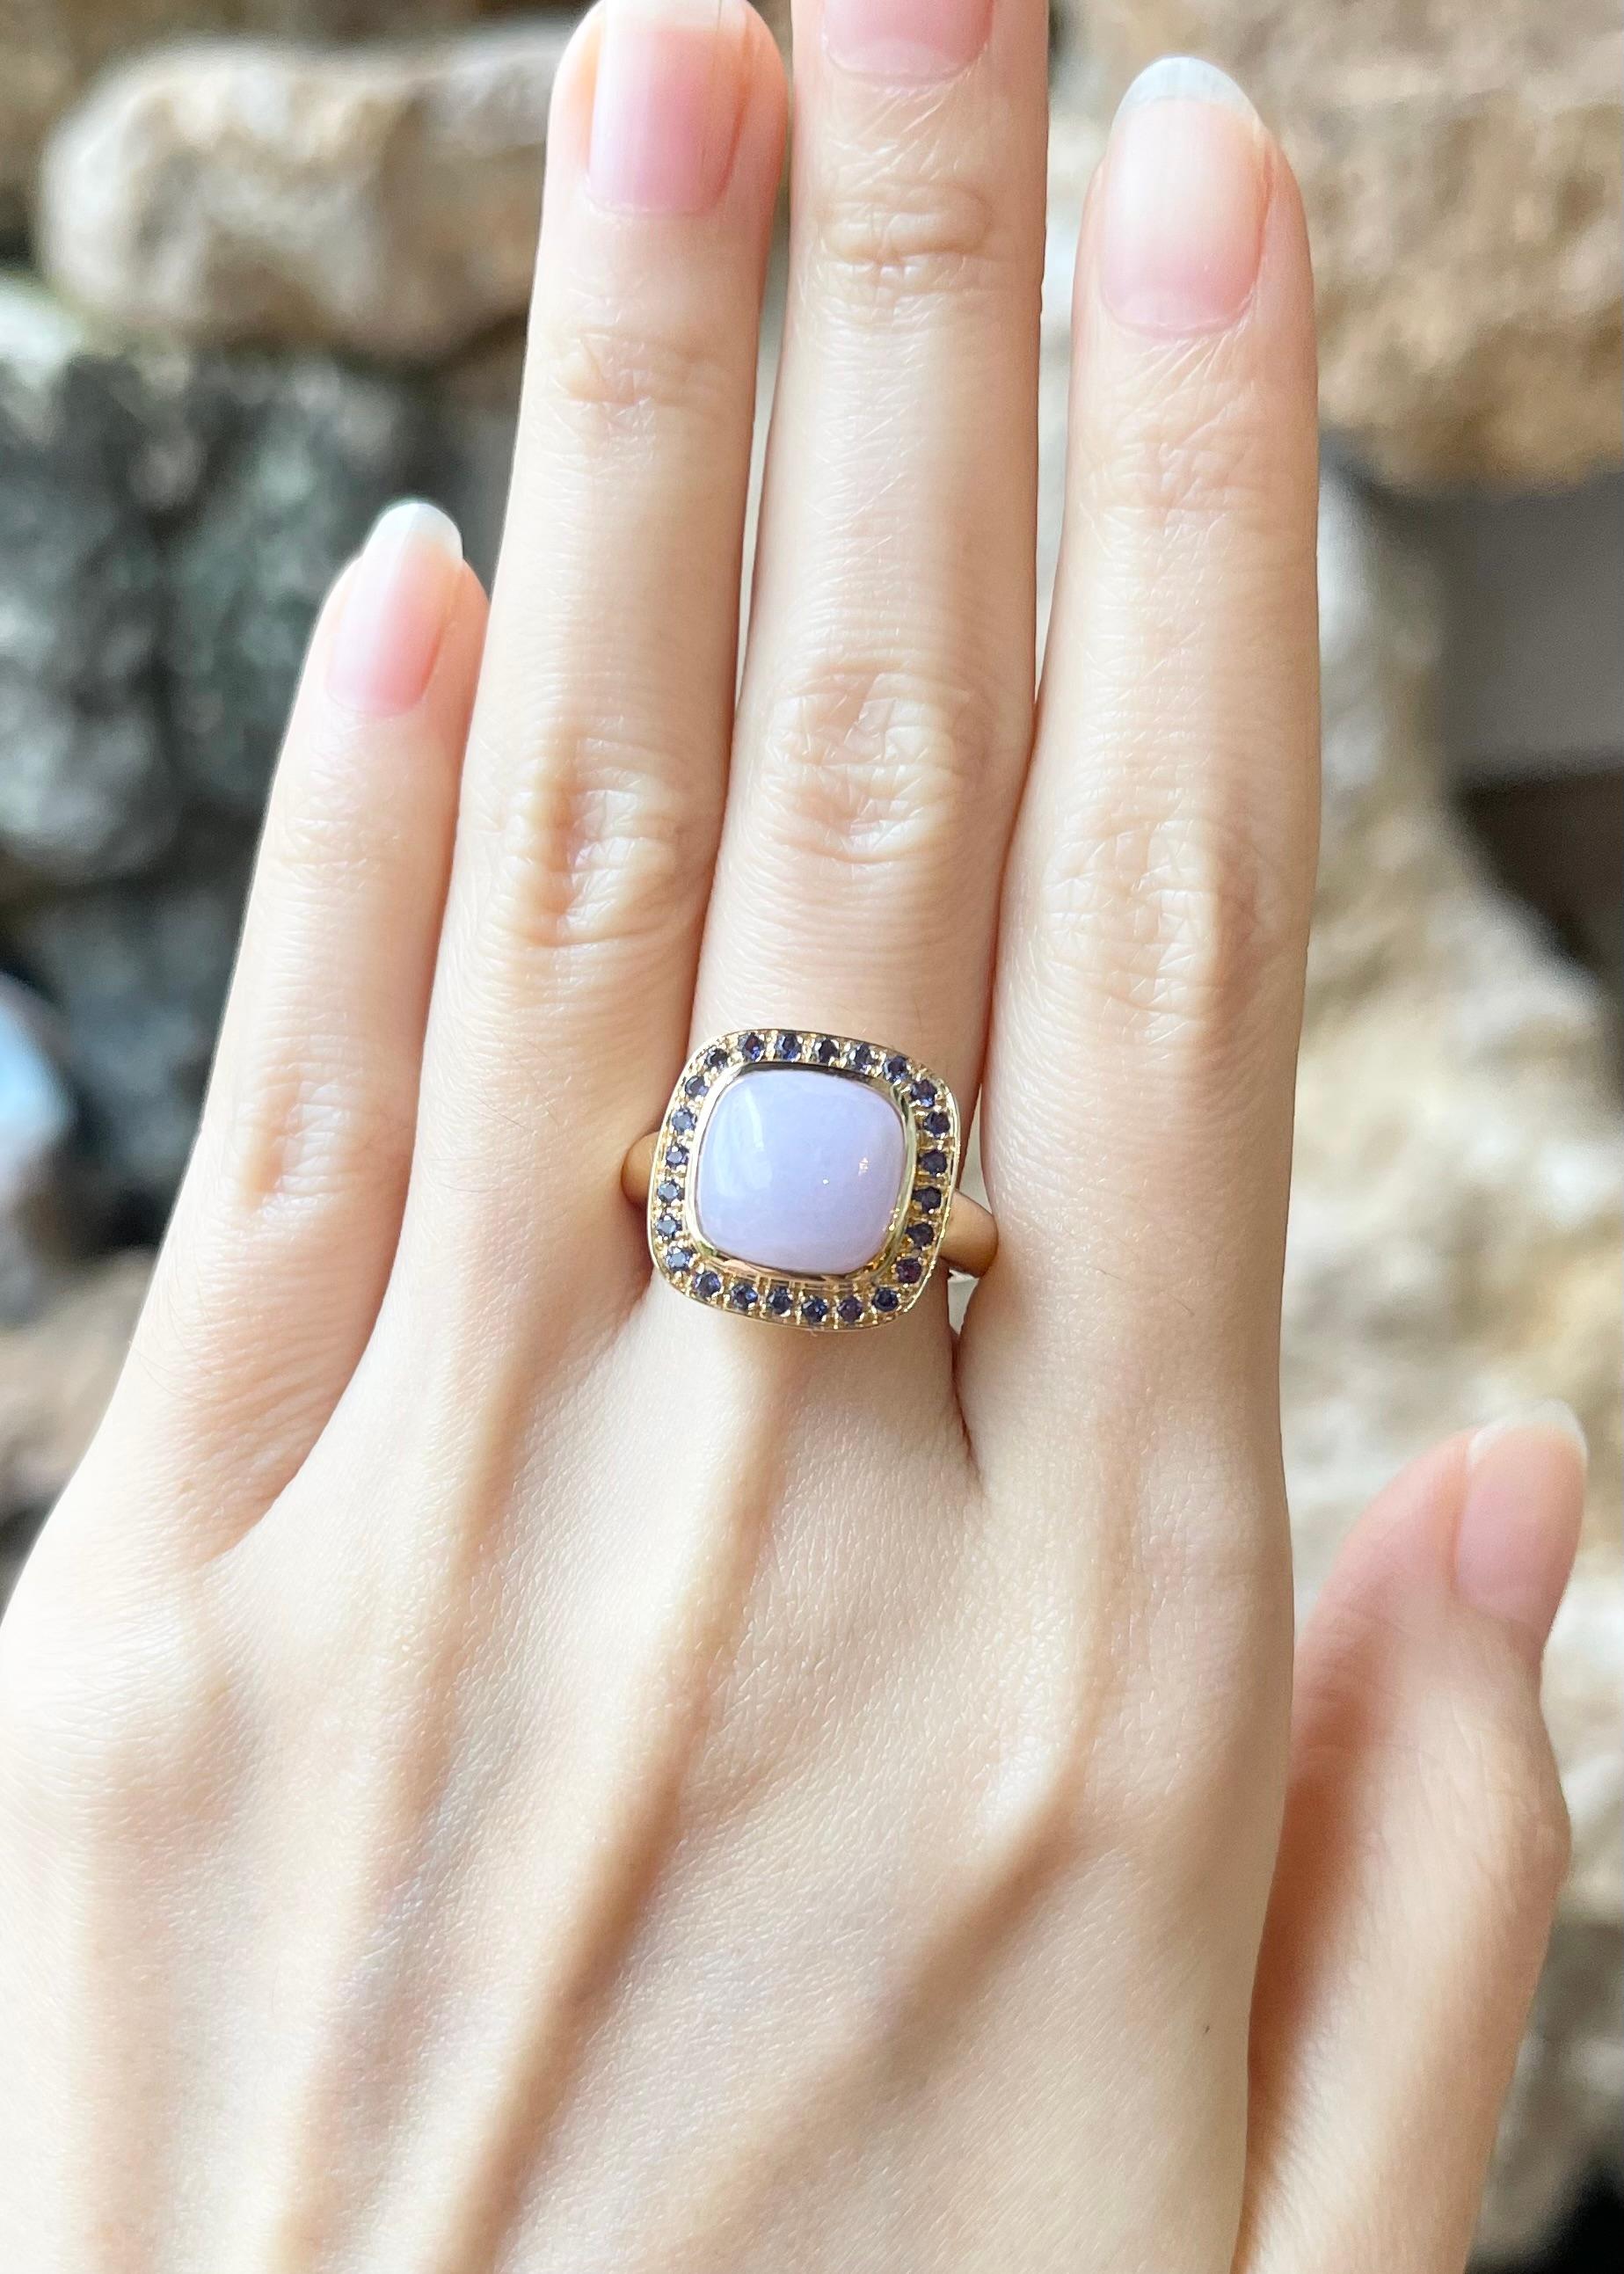 Lavender Jade 5.90 carats with Purple Sapphire 0.42 carats Ring set in 18k Gold Settings

Width:  1.4 cm 
Length: 1.4 cm
Ring Size: 53
Total Weight: 10.57 grams

